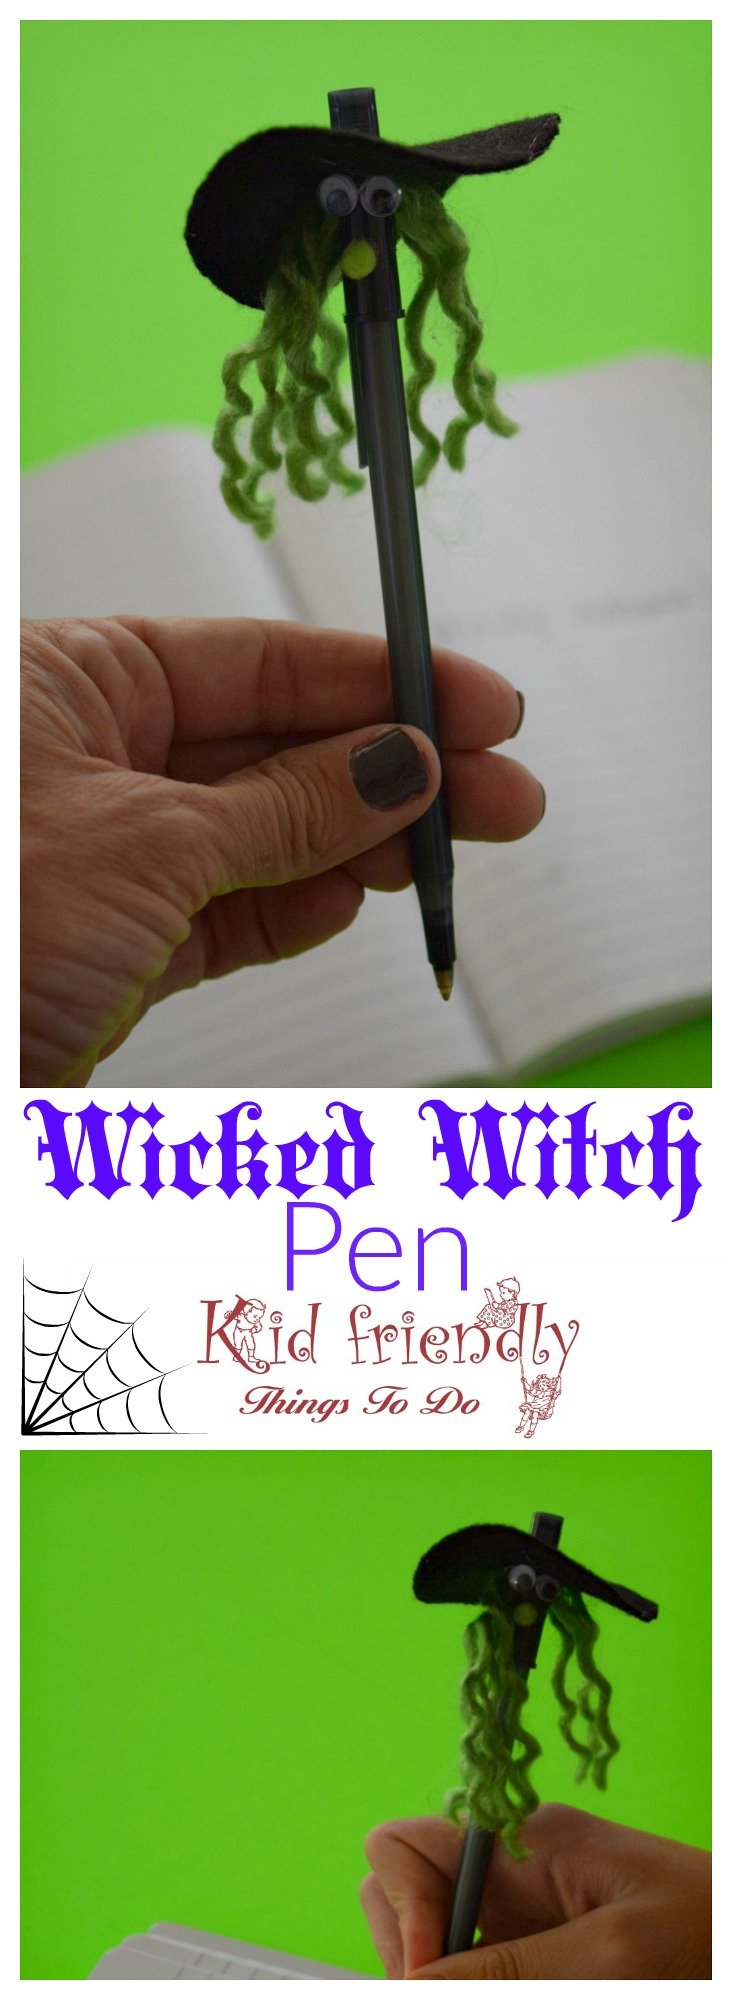 Make A Wicked Witch Pen or Pencil for a Kid Friendly Halloween Party Craft! - Easy to make & a perfect gift or activity to do - www.kidfriendlythingstodo.com